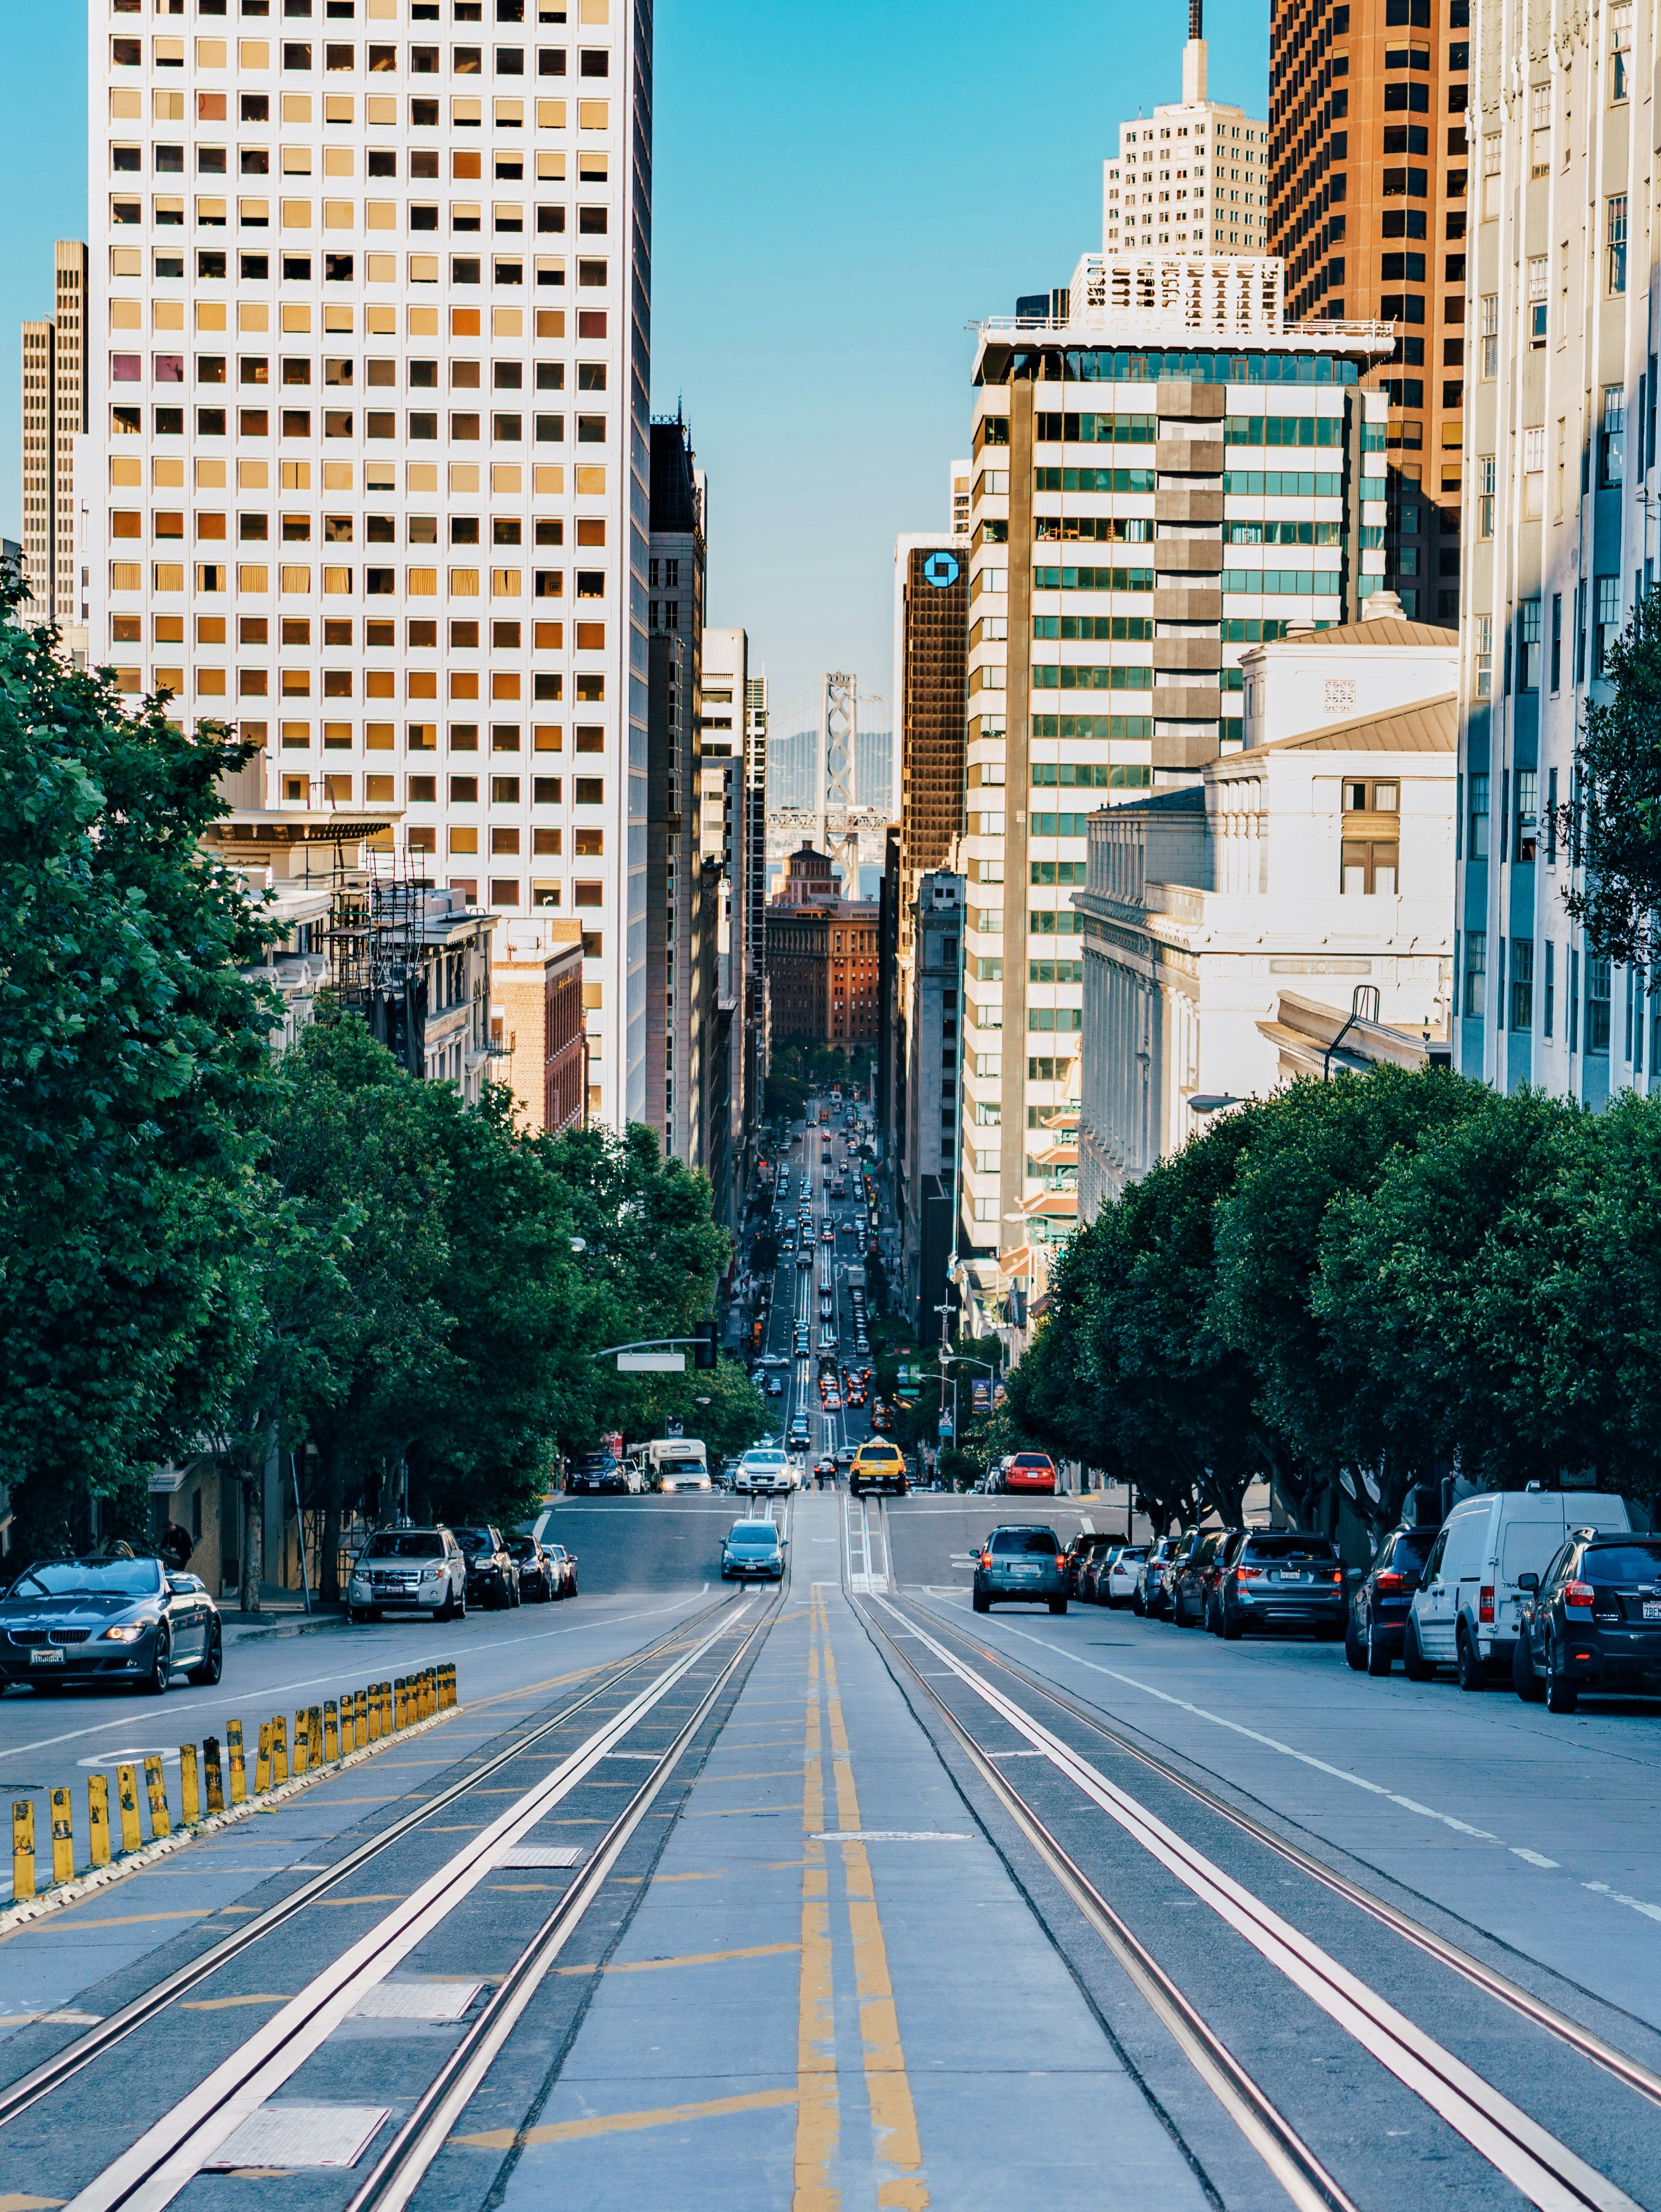 This view down California Street from Powell Street in San Francisco is absolutely breathtaking! Seeing the Oakland Bay Bridge in the background on this steep hill down at sunset is just something else. I recommend you also take the SF cable car going to or from Fisherman’s Bay to enjoy this and many other similarly great views of the city.